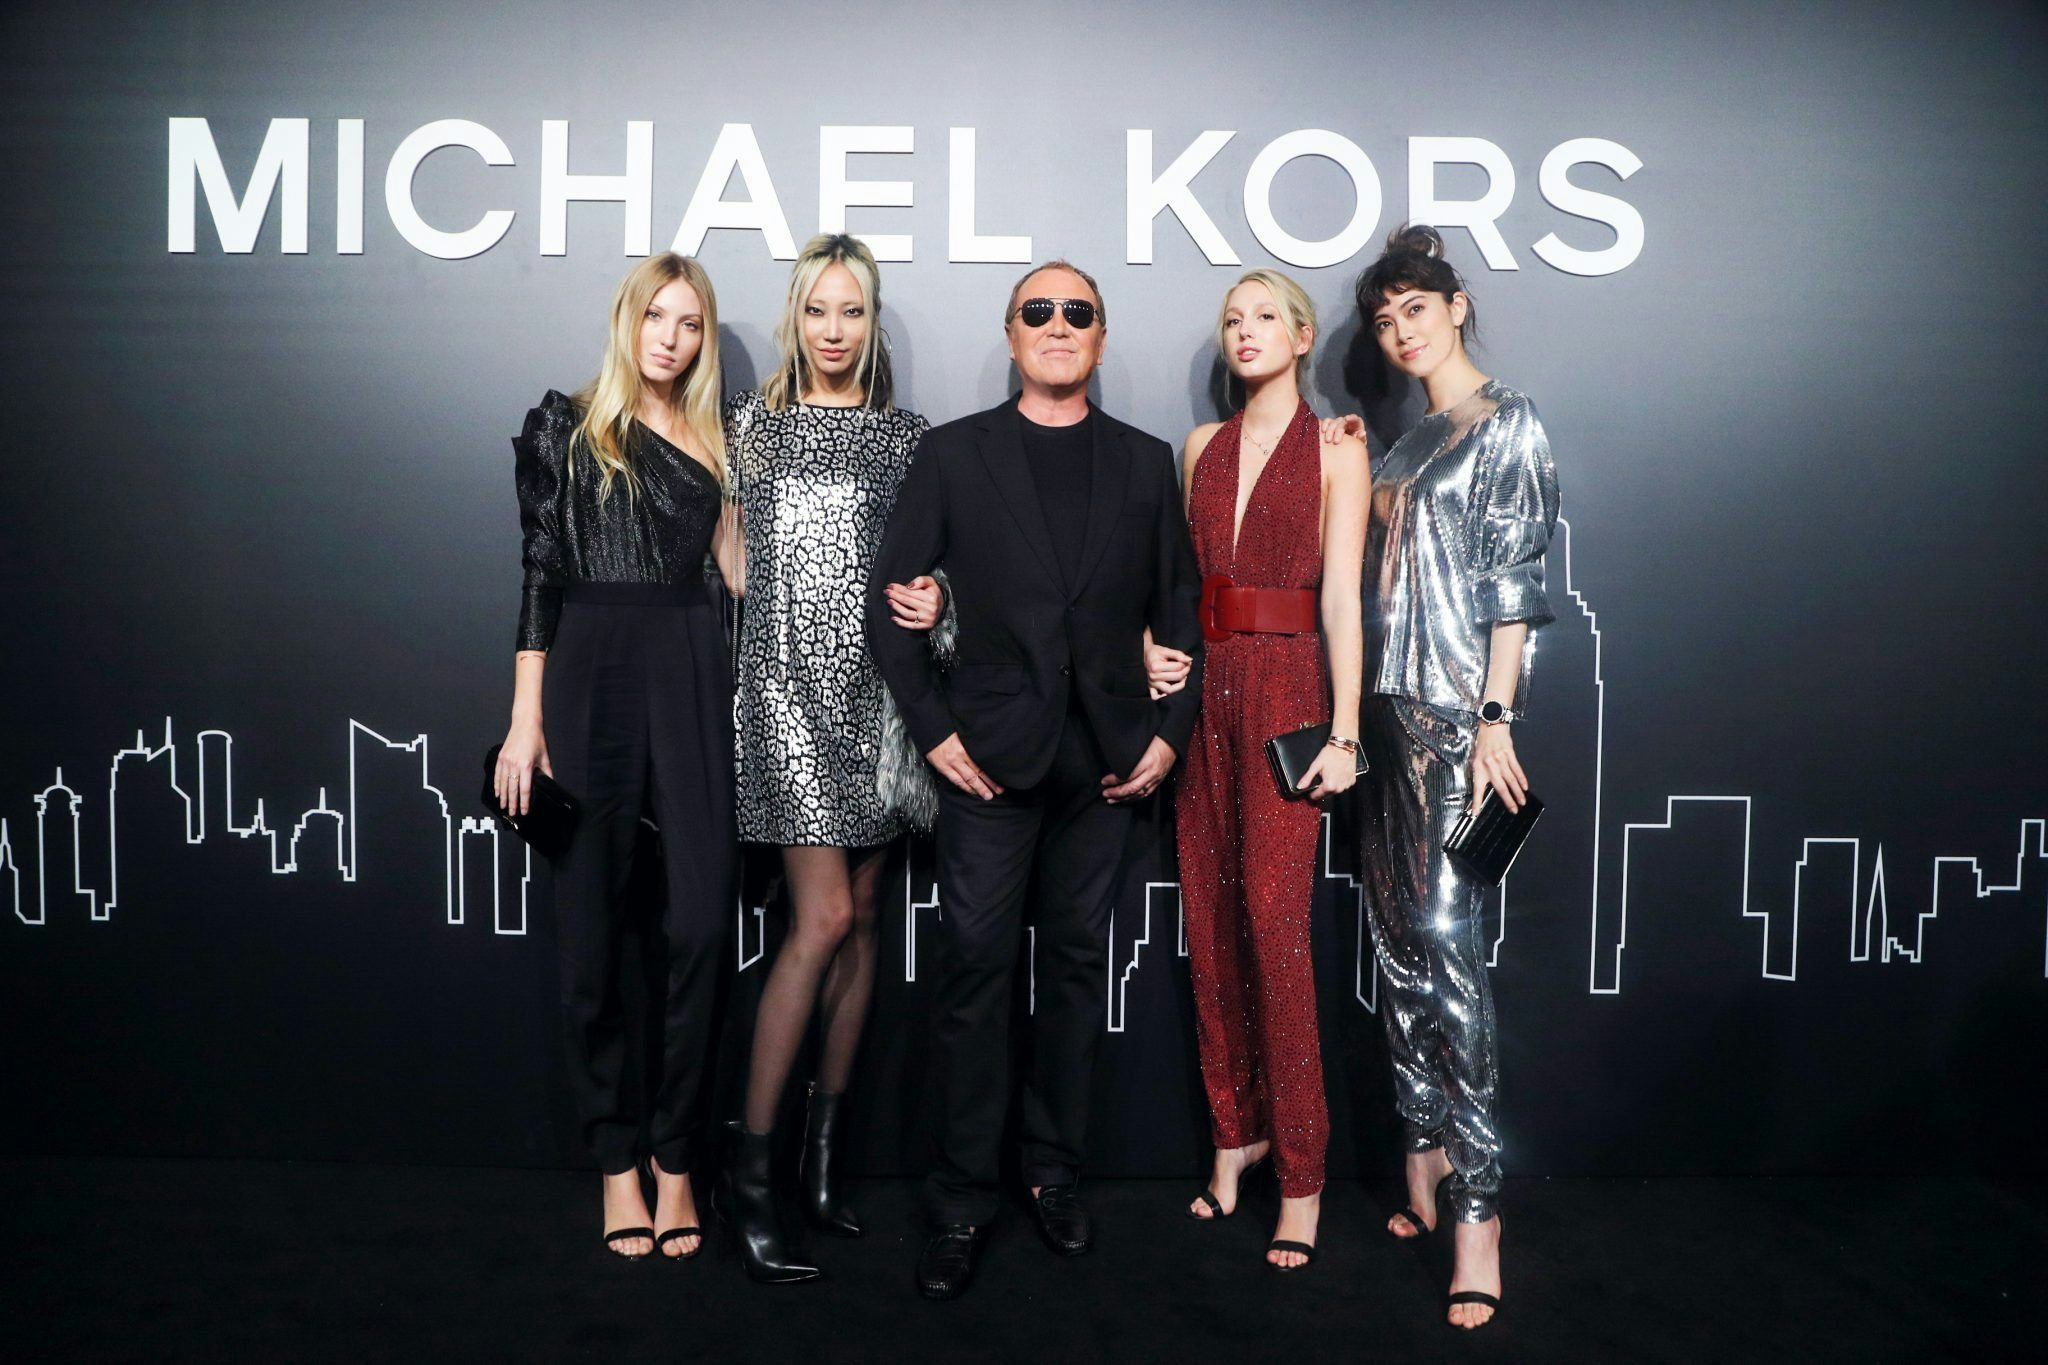 Why Michael Kors’ Shanghai Party is a Killer Digital Marketing Campaign